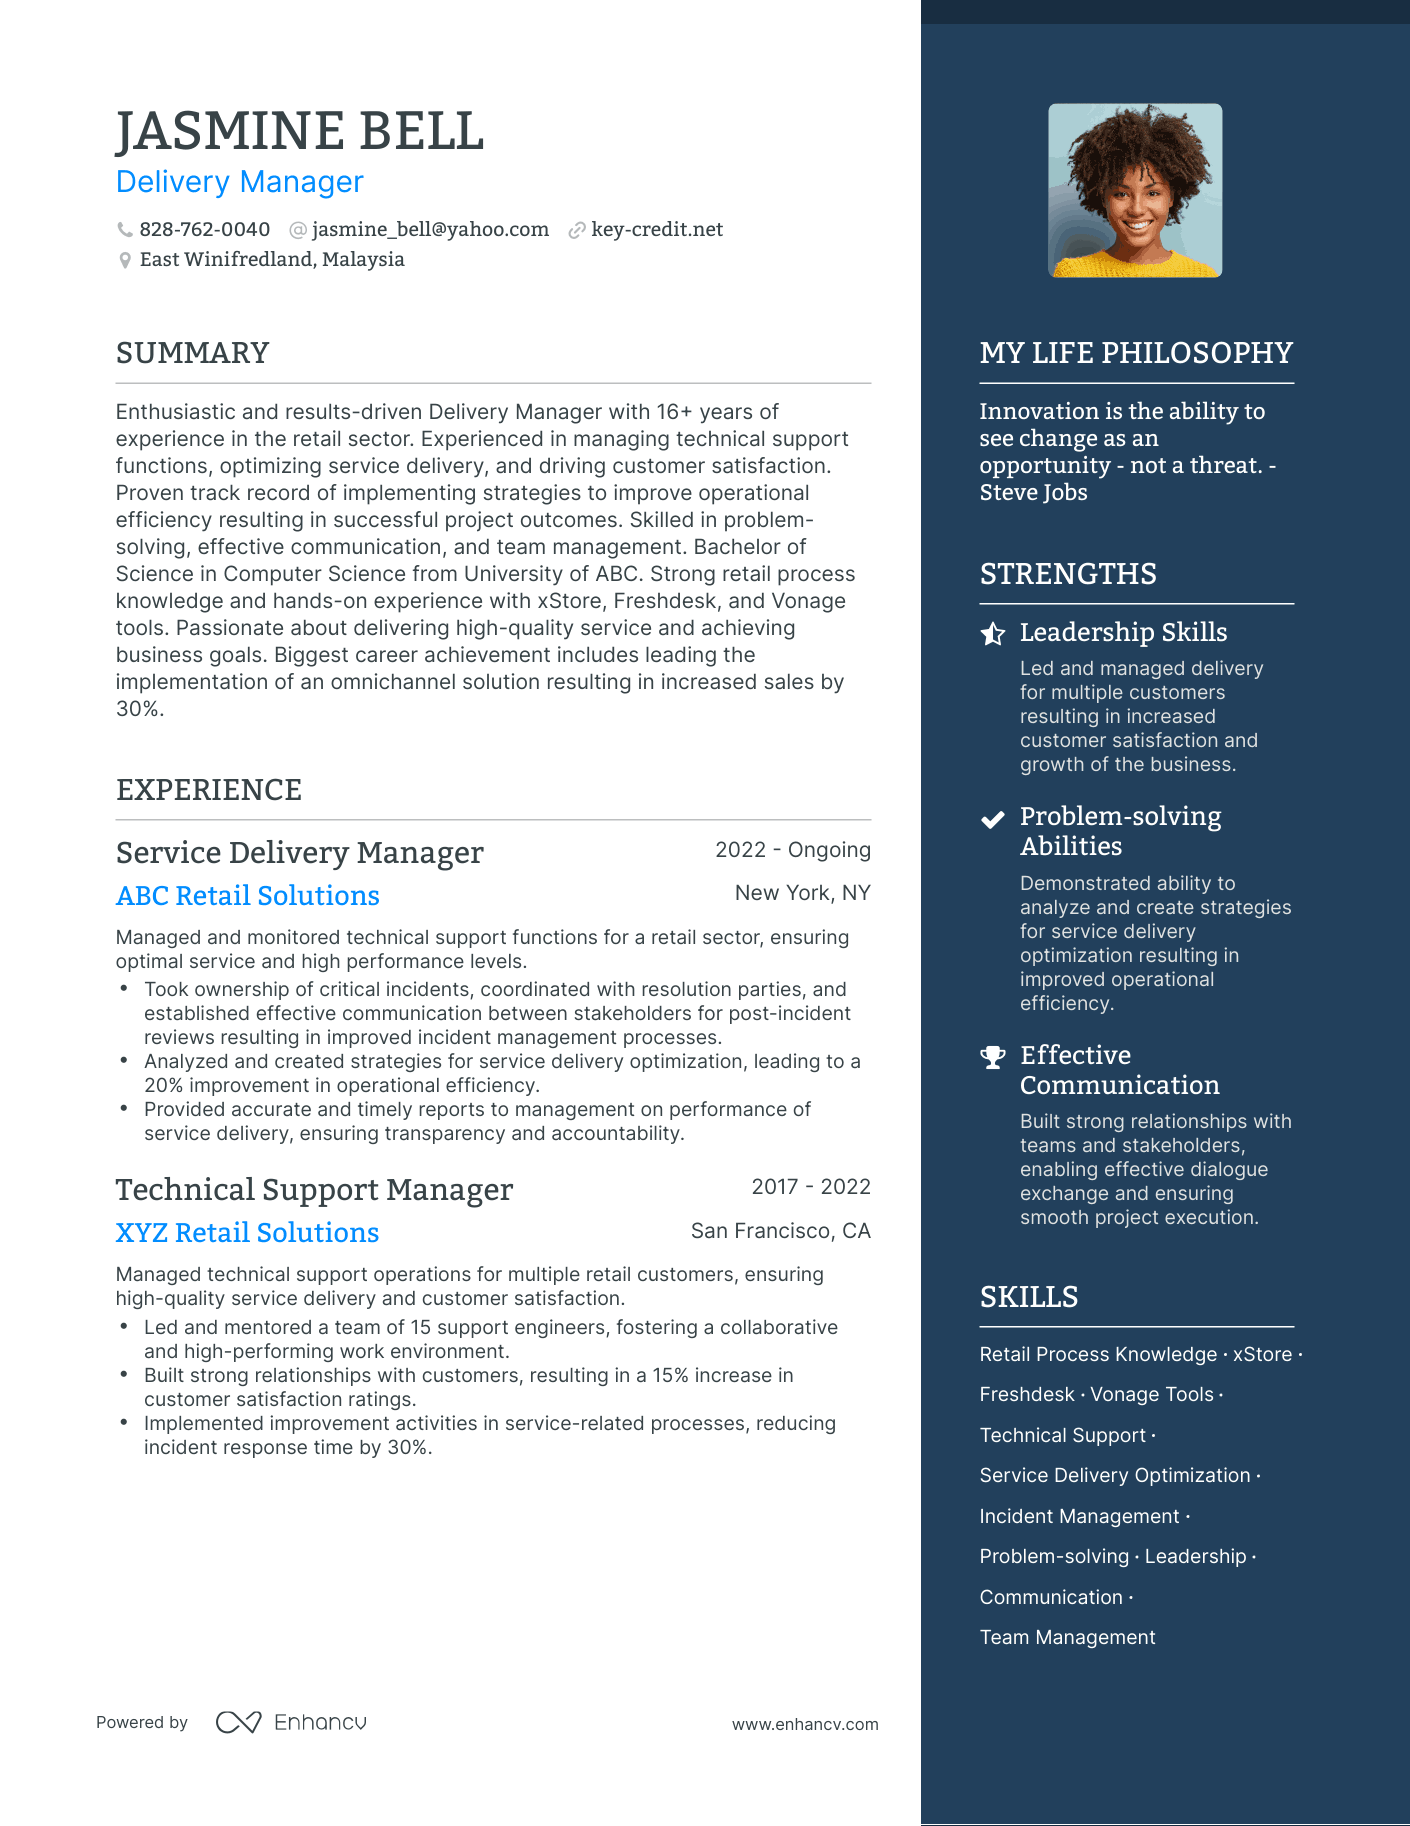 Delivery Manager resume example